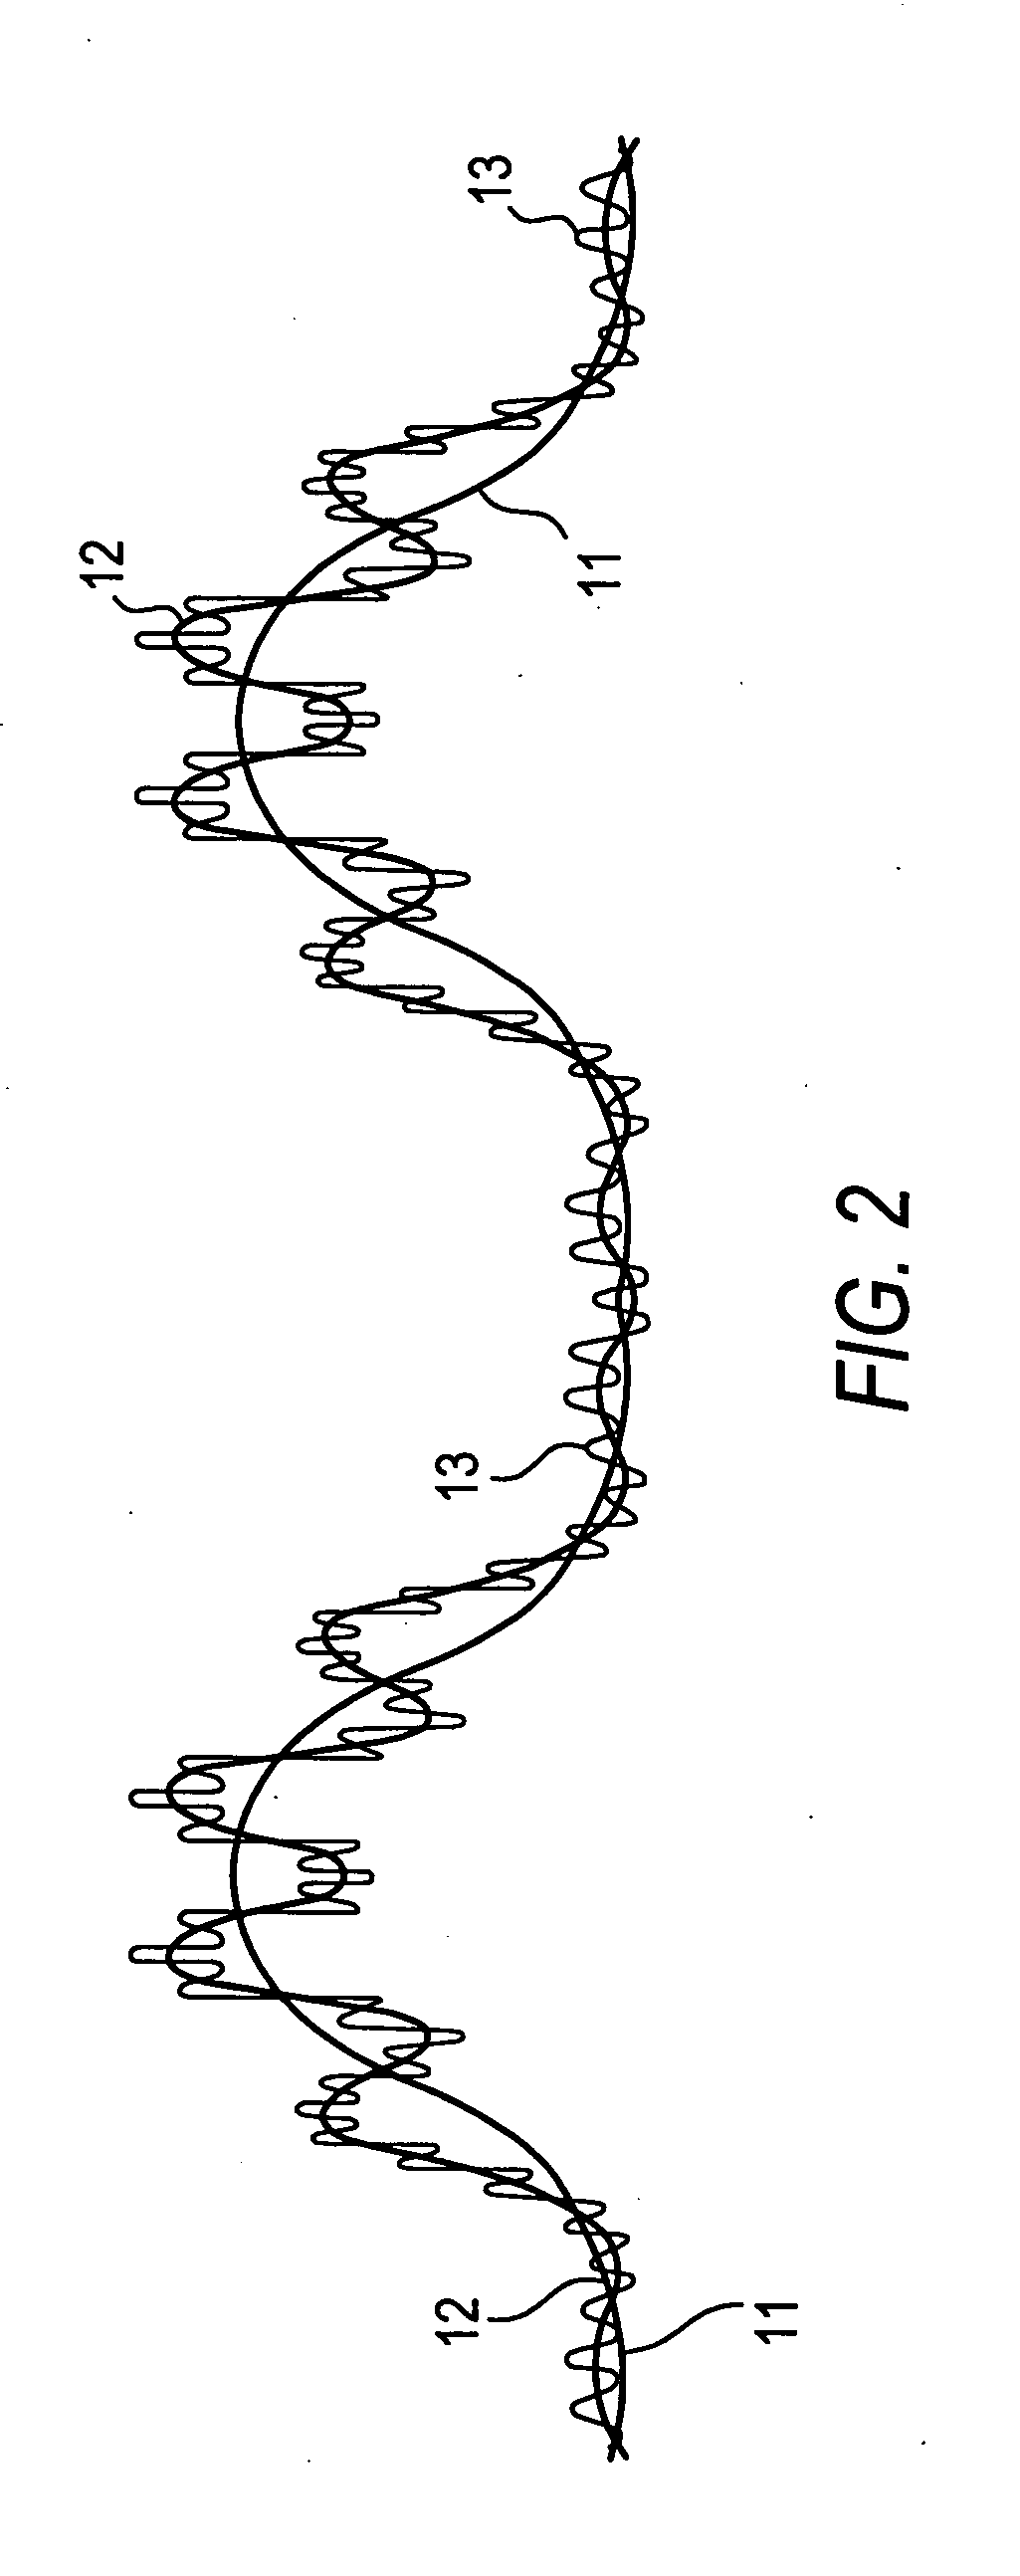 Systems and methods of electromagnetic influence on electroconducting continuum